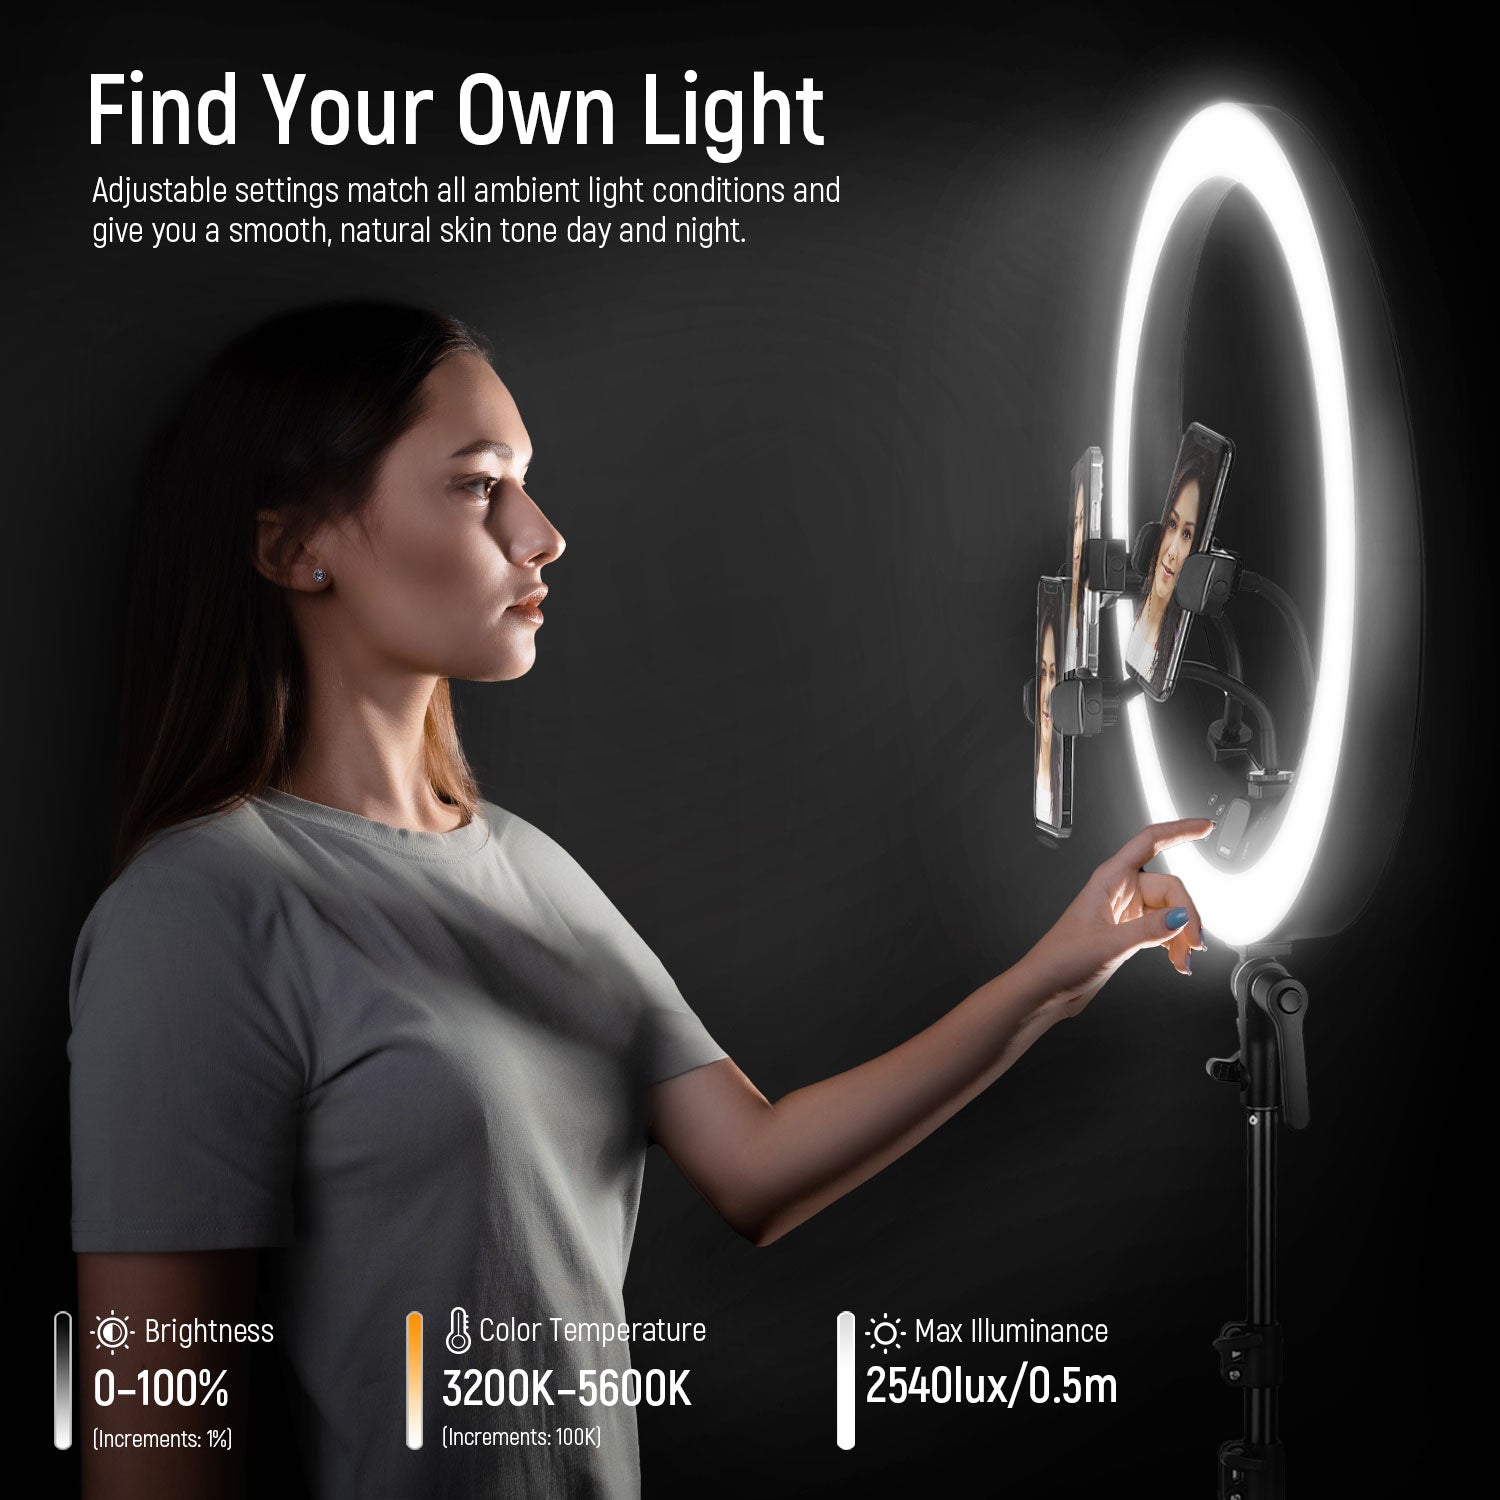 Ring Light | Up to 50% Off On Sale | Photographic LED Light | NEEWER